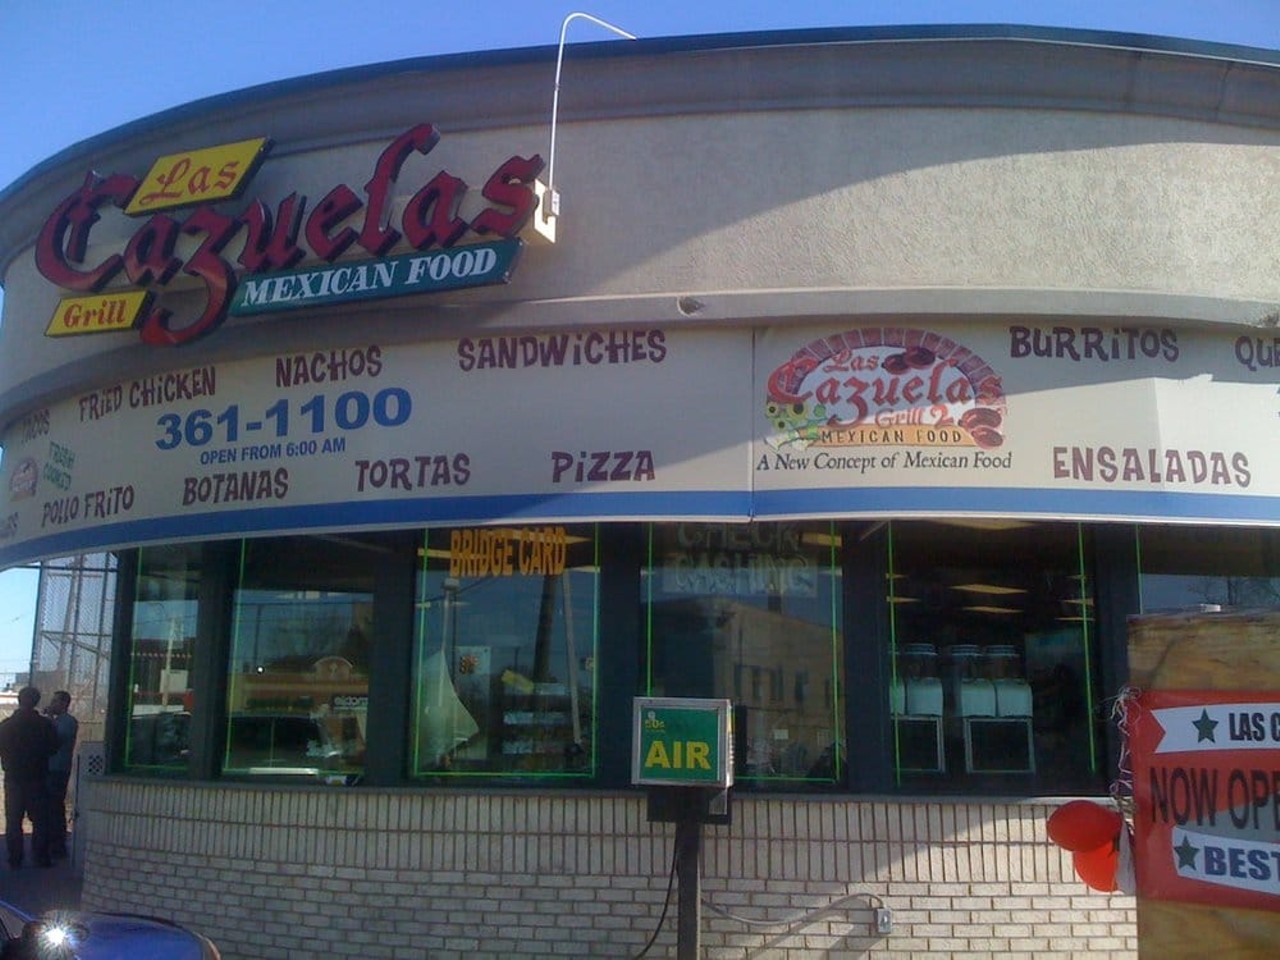 Las Cazuelas
4000 Livernois Ave., Detroit
Who knew so much good Mexican food could be found in gas stations? This one began at a local BP and now also has a location in Southfield. The restaurant is known for its traditional dishes and opens at 6 a.m. for Mexican-style breakfast. —Layla McMurtrie